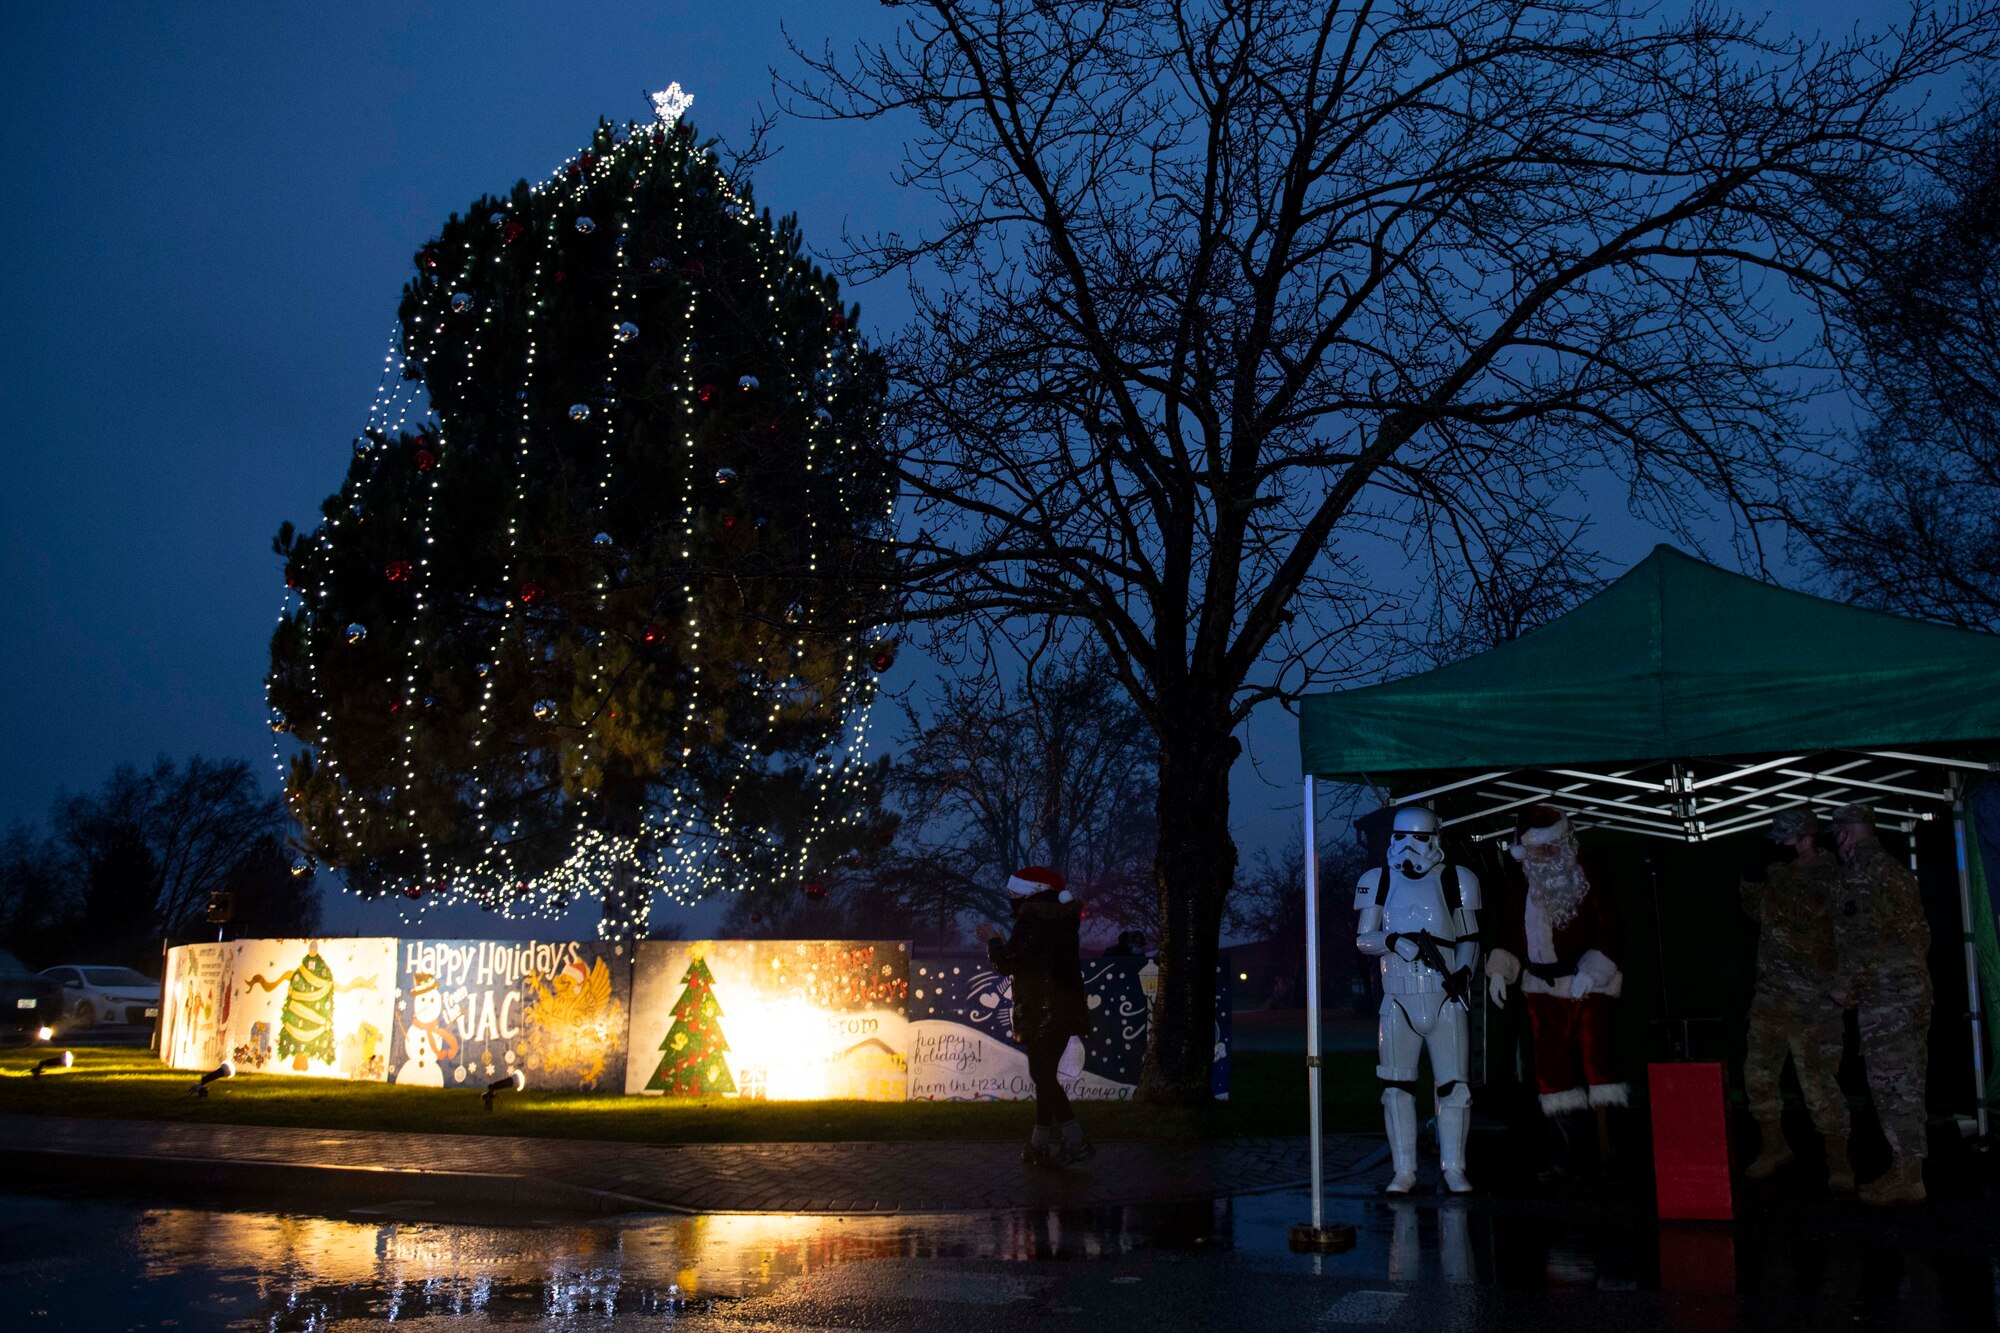 Members of the 501st Combat Support Wing community gather for a tree lighting ceremony at RAF Alconbury, England, Dec. 4, 2020. Col. Kurt Wendt, 501 CSW commander, and Chief Master Sgt. Daniel Keene, 501 CSW command chief, lit the tree with Santa Clause. (U.S. Air Force photo by Senior Airman Jennifer Zima)